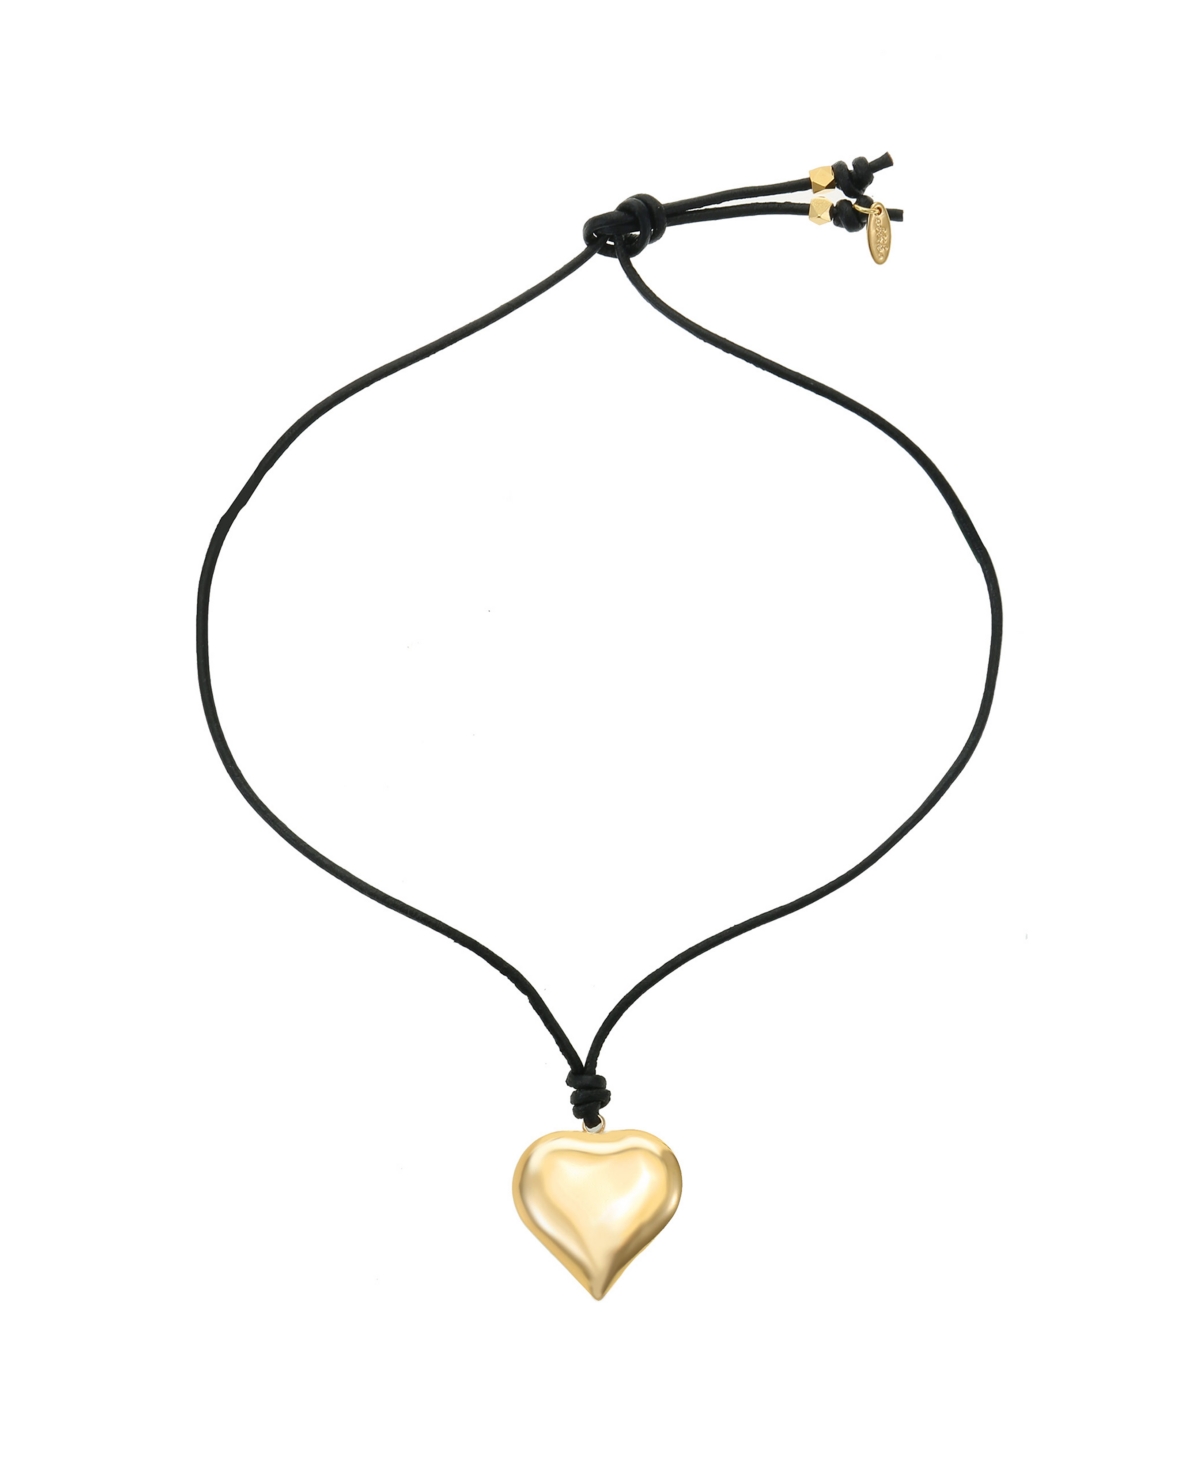 18K Gold Plated Heart Pendant Adjustable Cord Necklace - Black